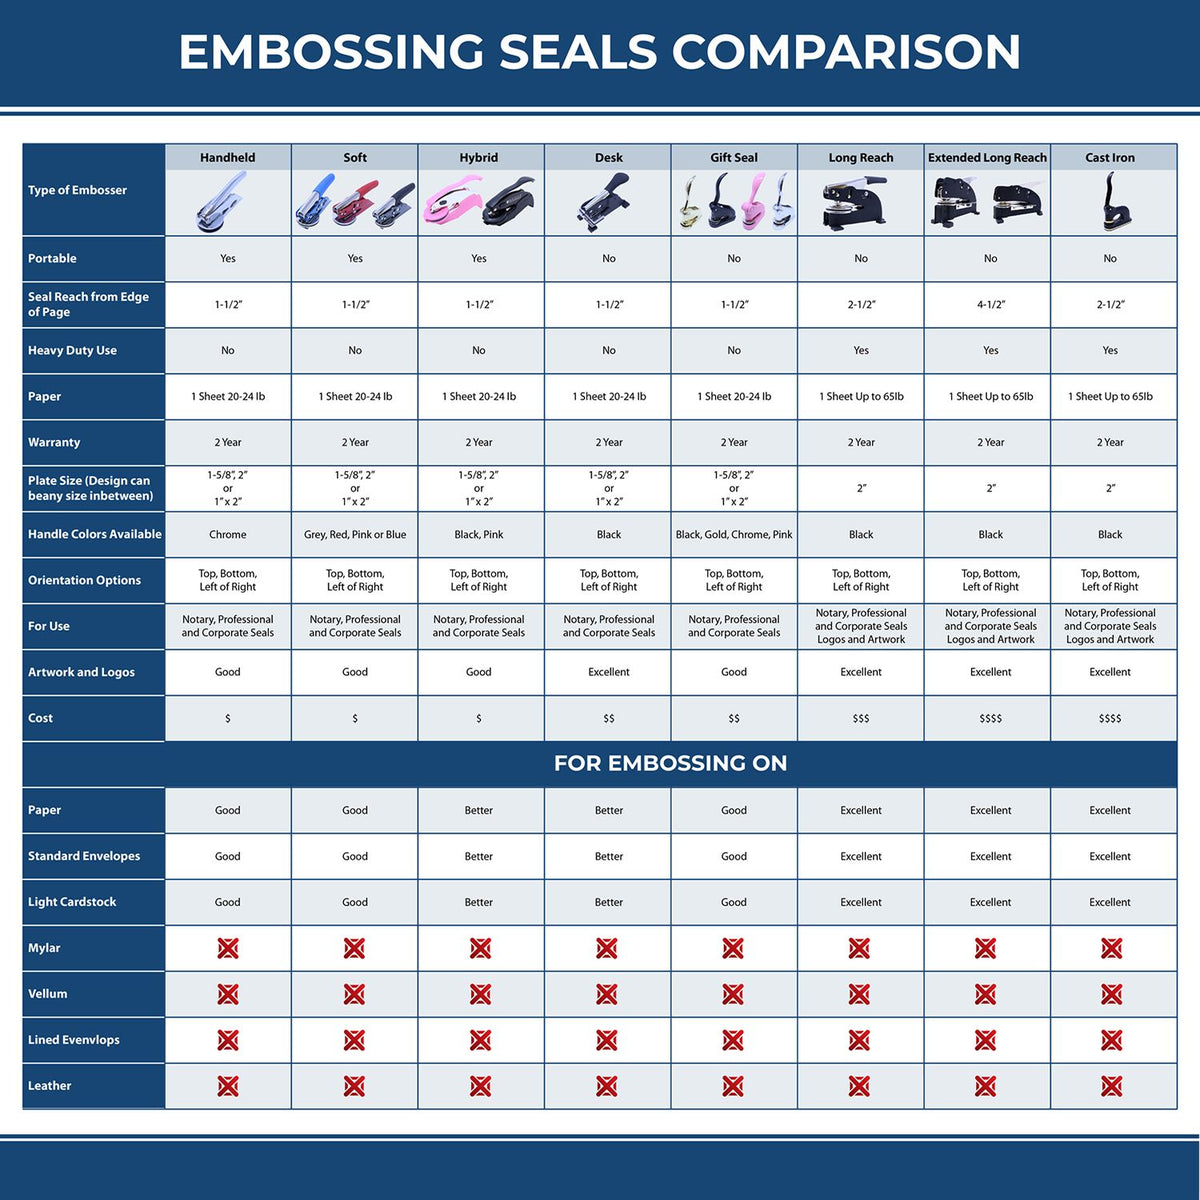 A comparison chart for the different types of mount models available for the Gift Maine Architect Seal